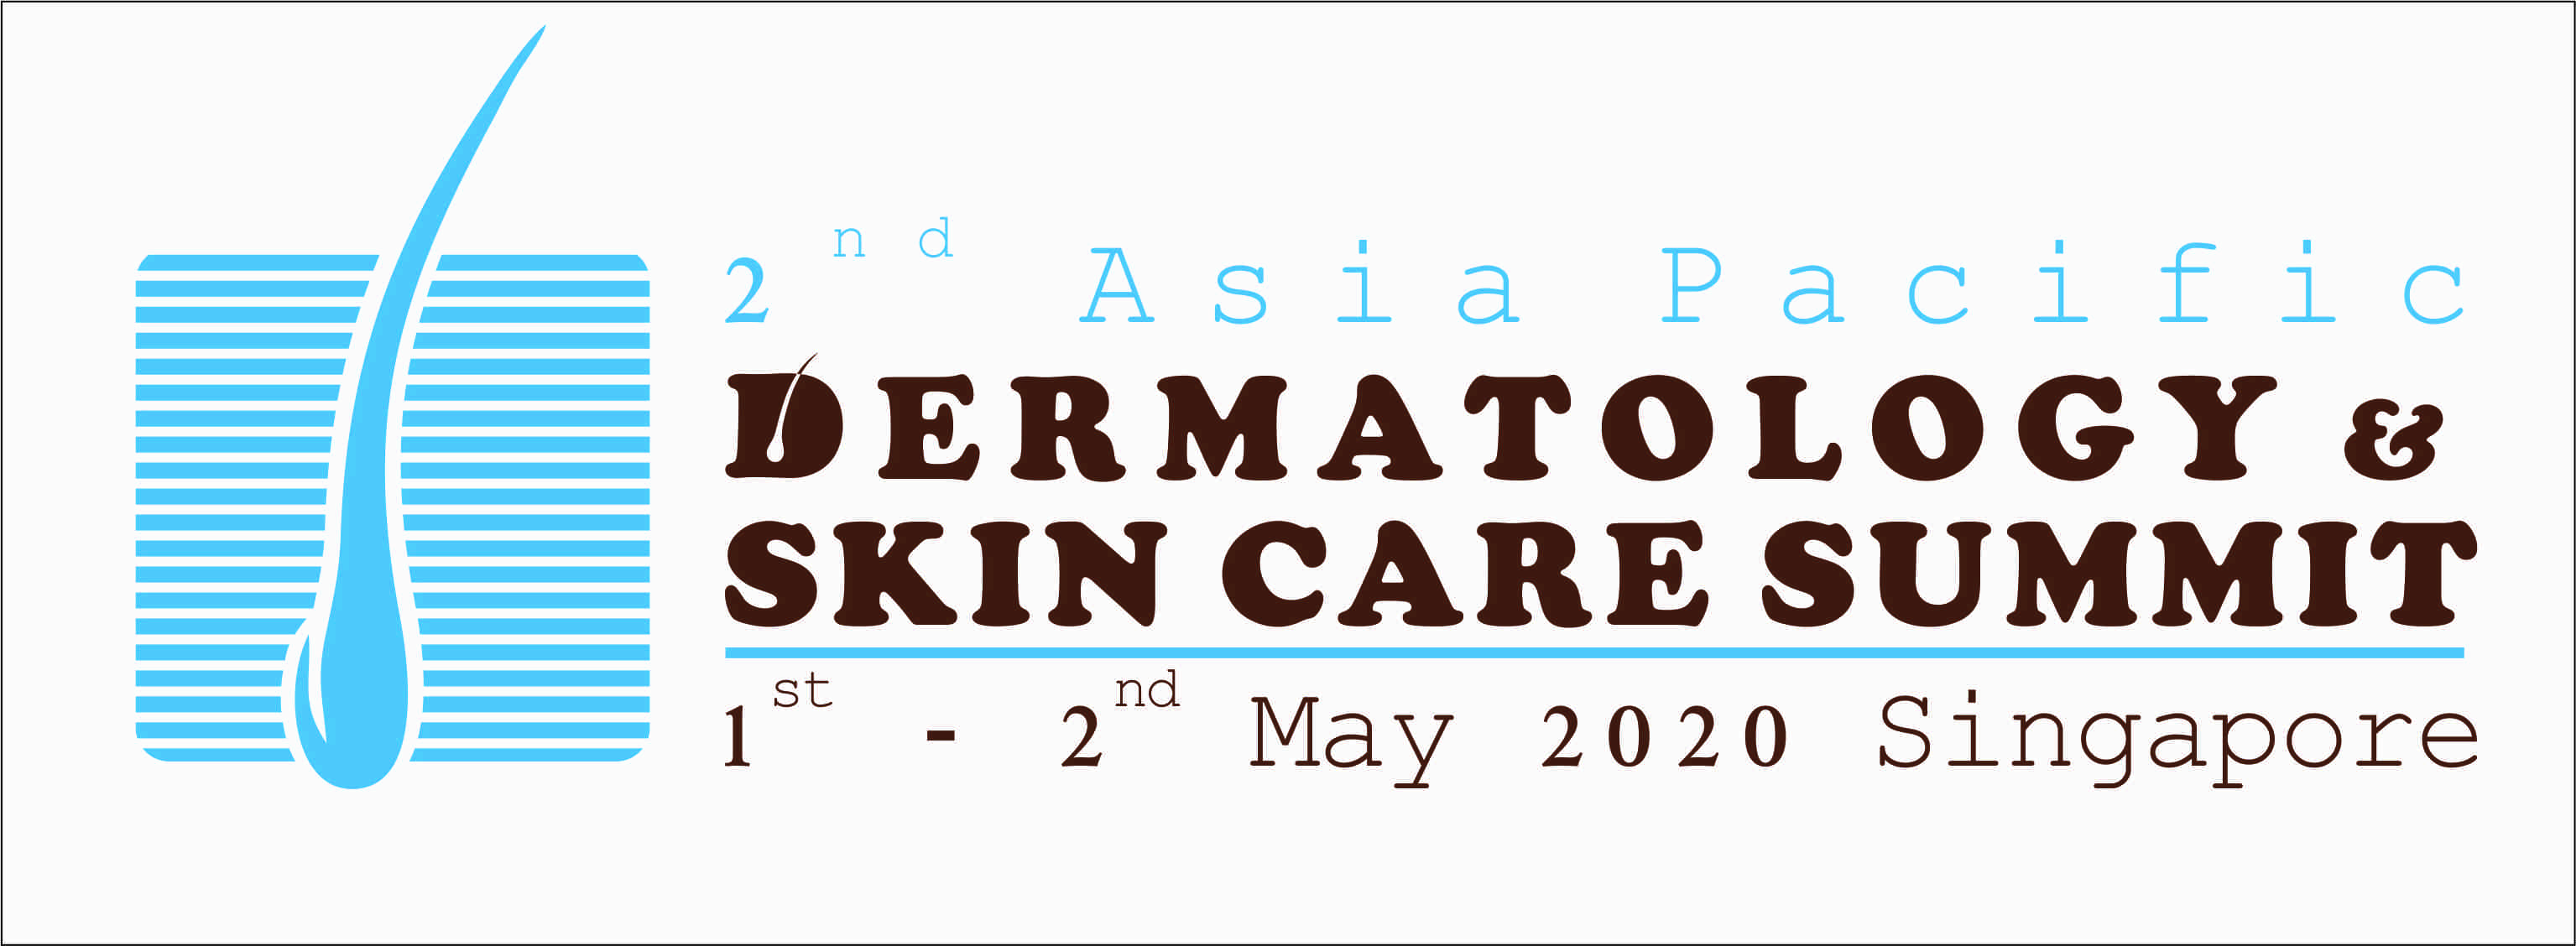 2nd Asia Pacific Dermatology and Skin Care Summit, Singapore, Central, Singapore